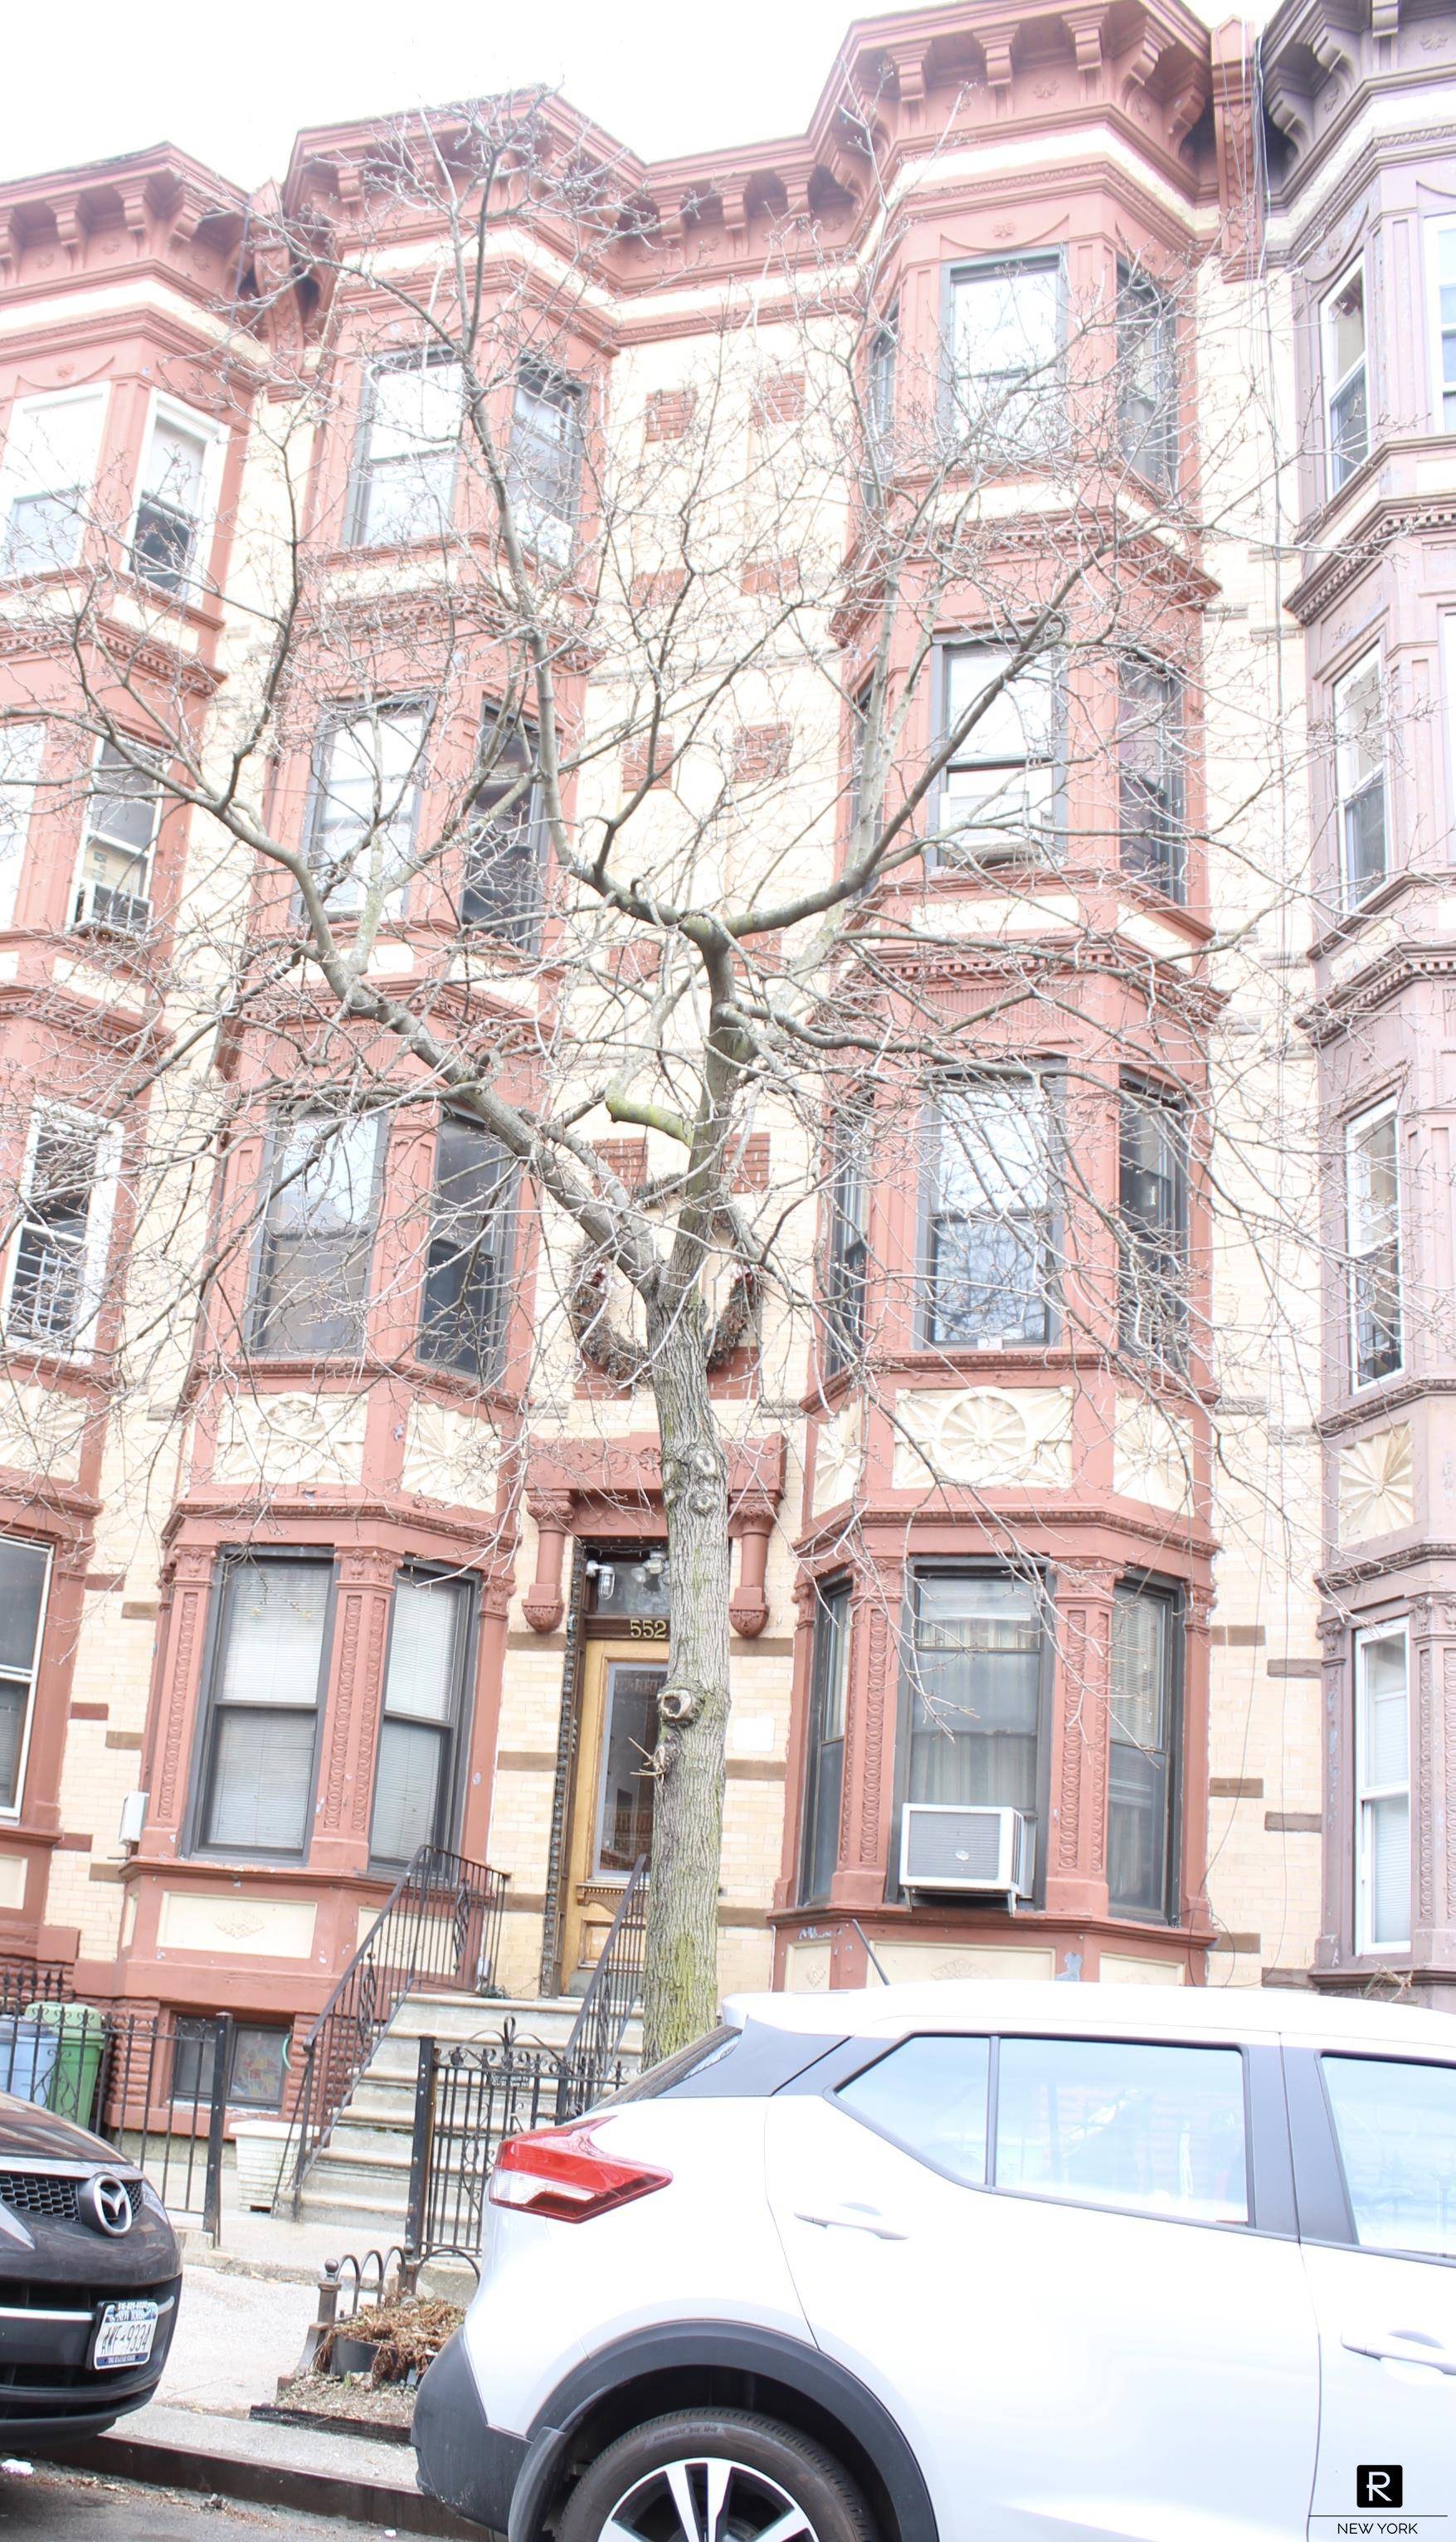 ONCE IN A LIFETIME OPPORTUNITY TO OWN AN 8 FAMILY HOME IN THE HEART OF PARK SLOPE.